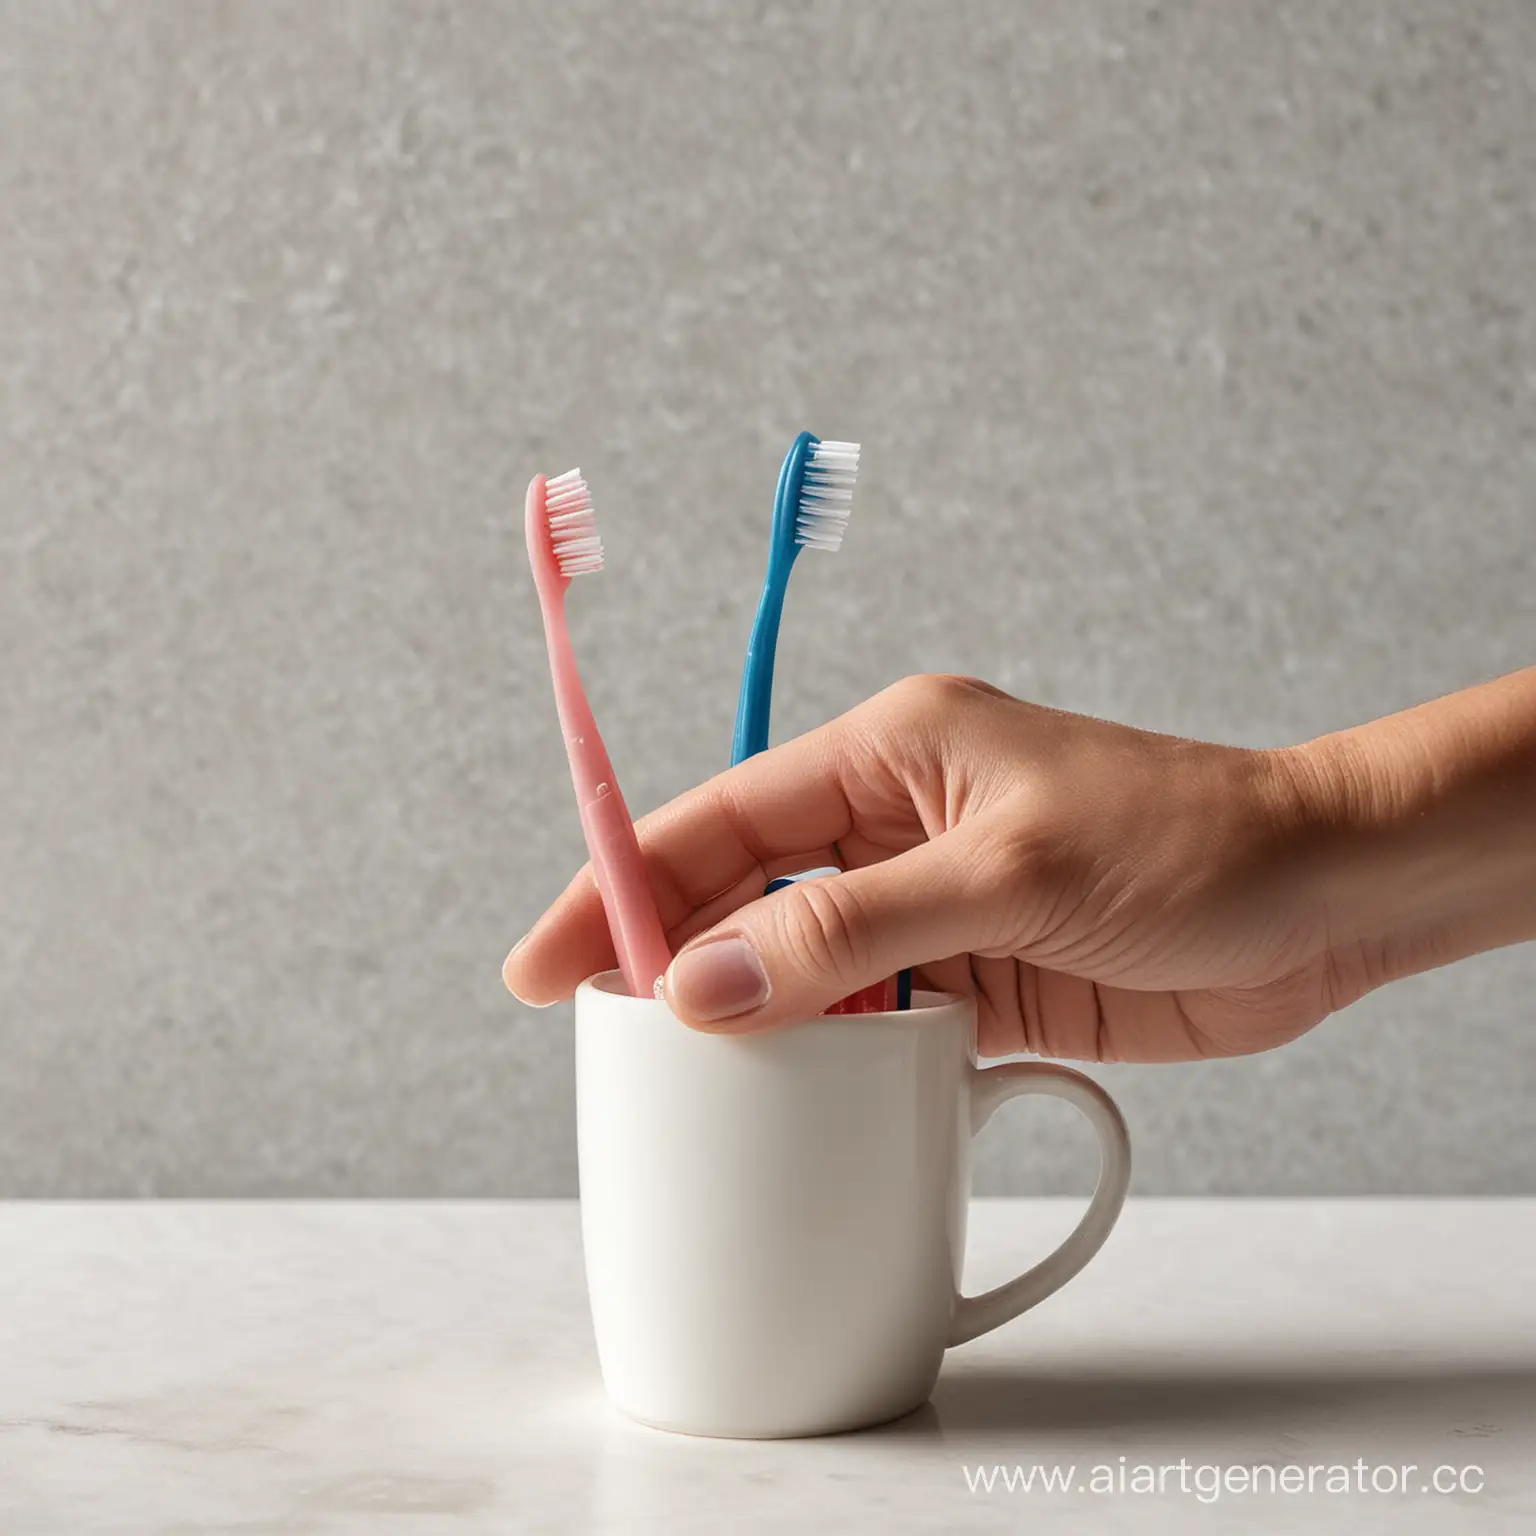 Hand-Retrieving-Toothbrush-from-Cup